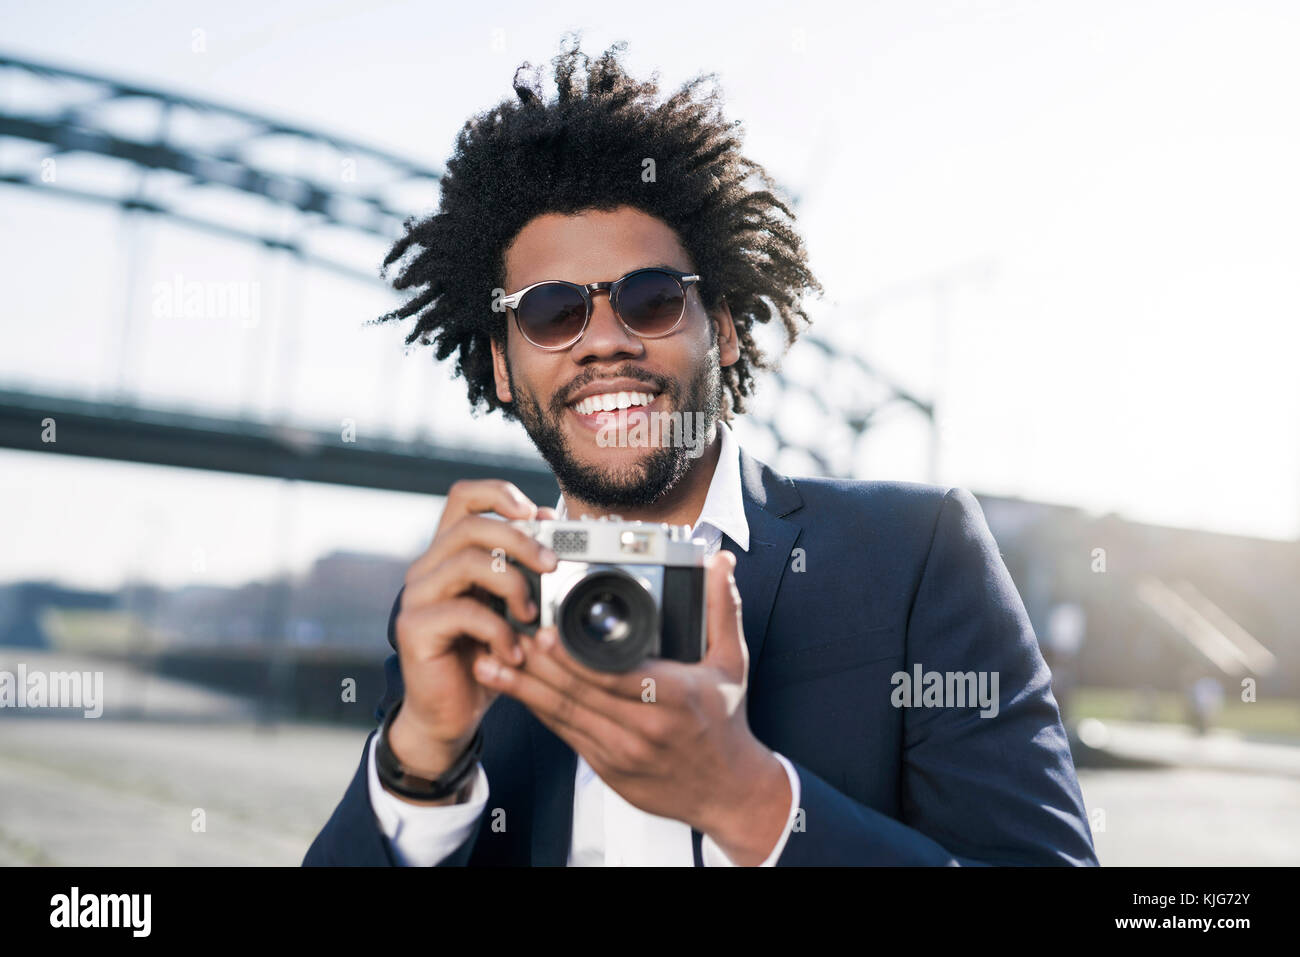 Smiling man in suit at the riverside holding a vintage camera Stock Photo